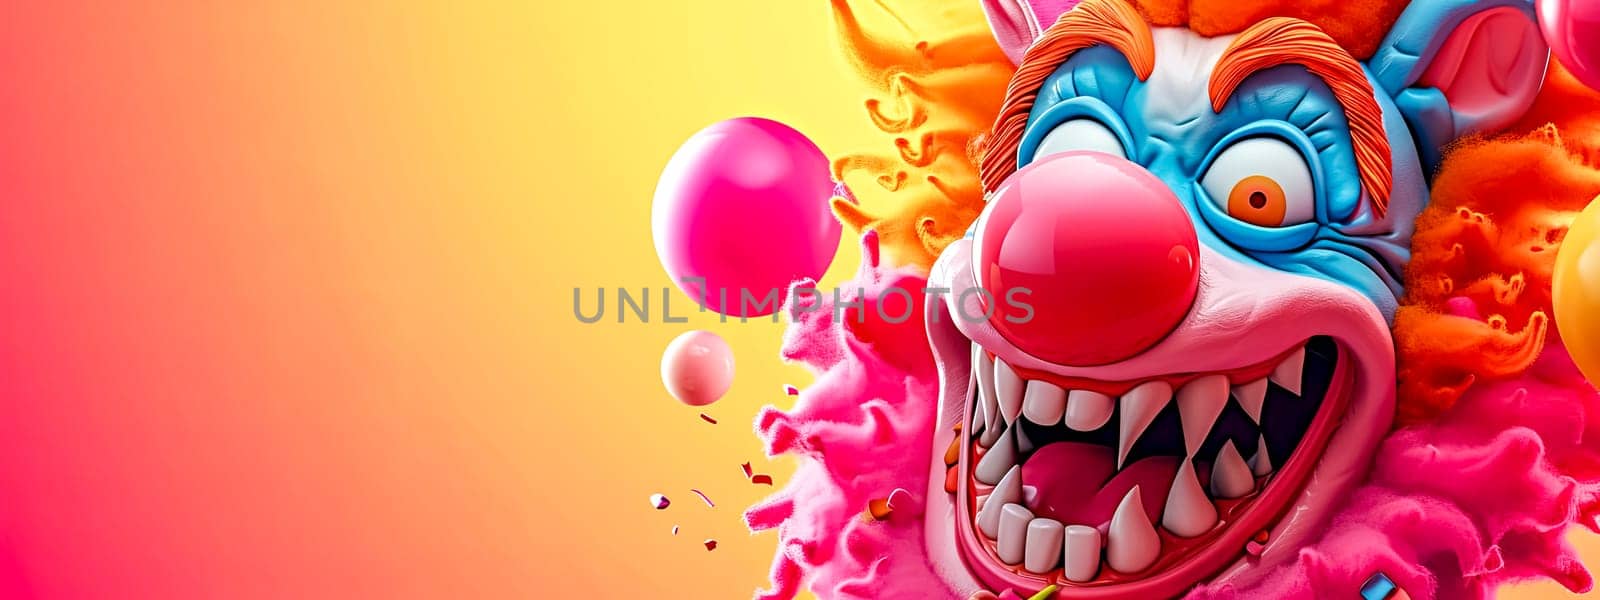 clown-like character with exaggerated facial features, set against a gradient orange and yellow background. by Edophoto